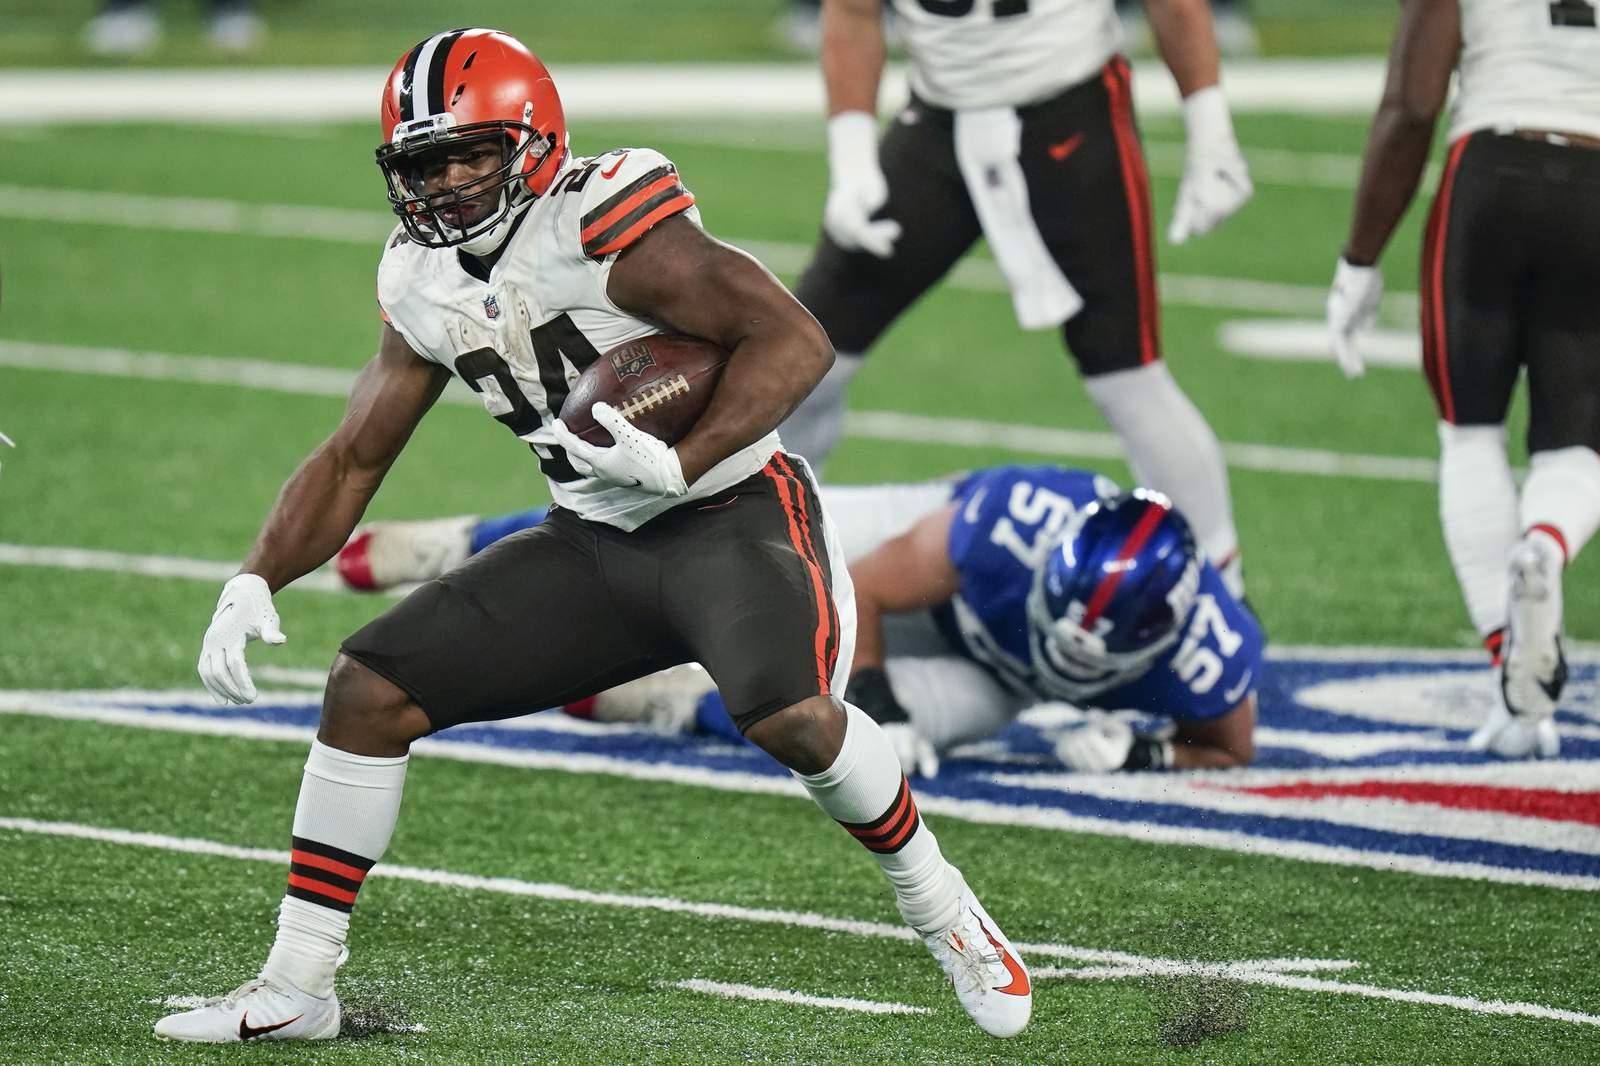 Browns closing in on ending lengthy playoff drought